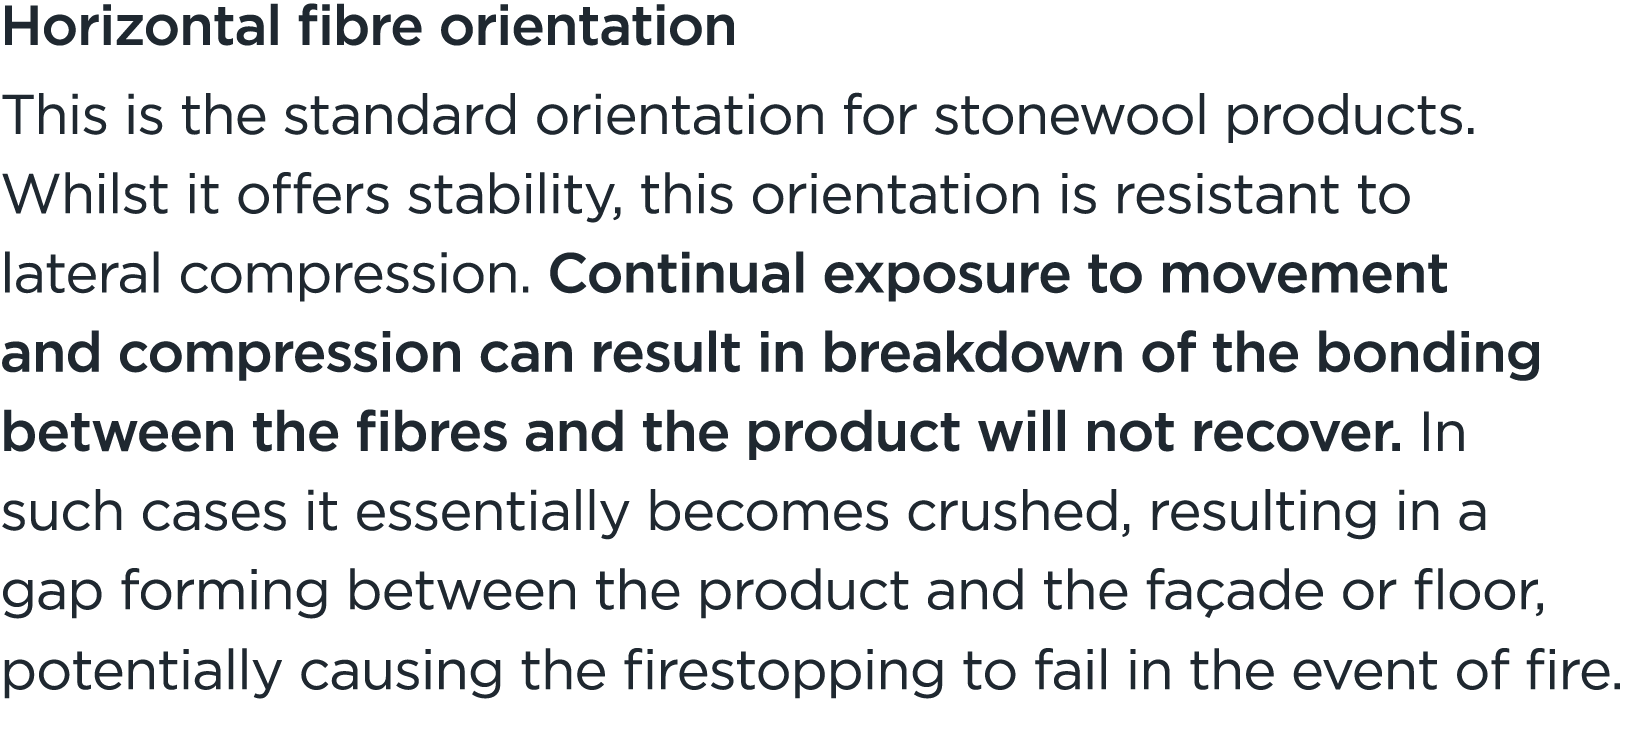 Horizontal fibre orientation This is the standard orientation for stonewool products. Whilst it offers stability, thi...